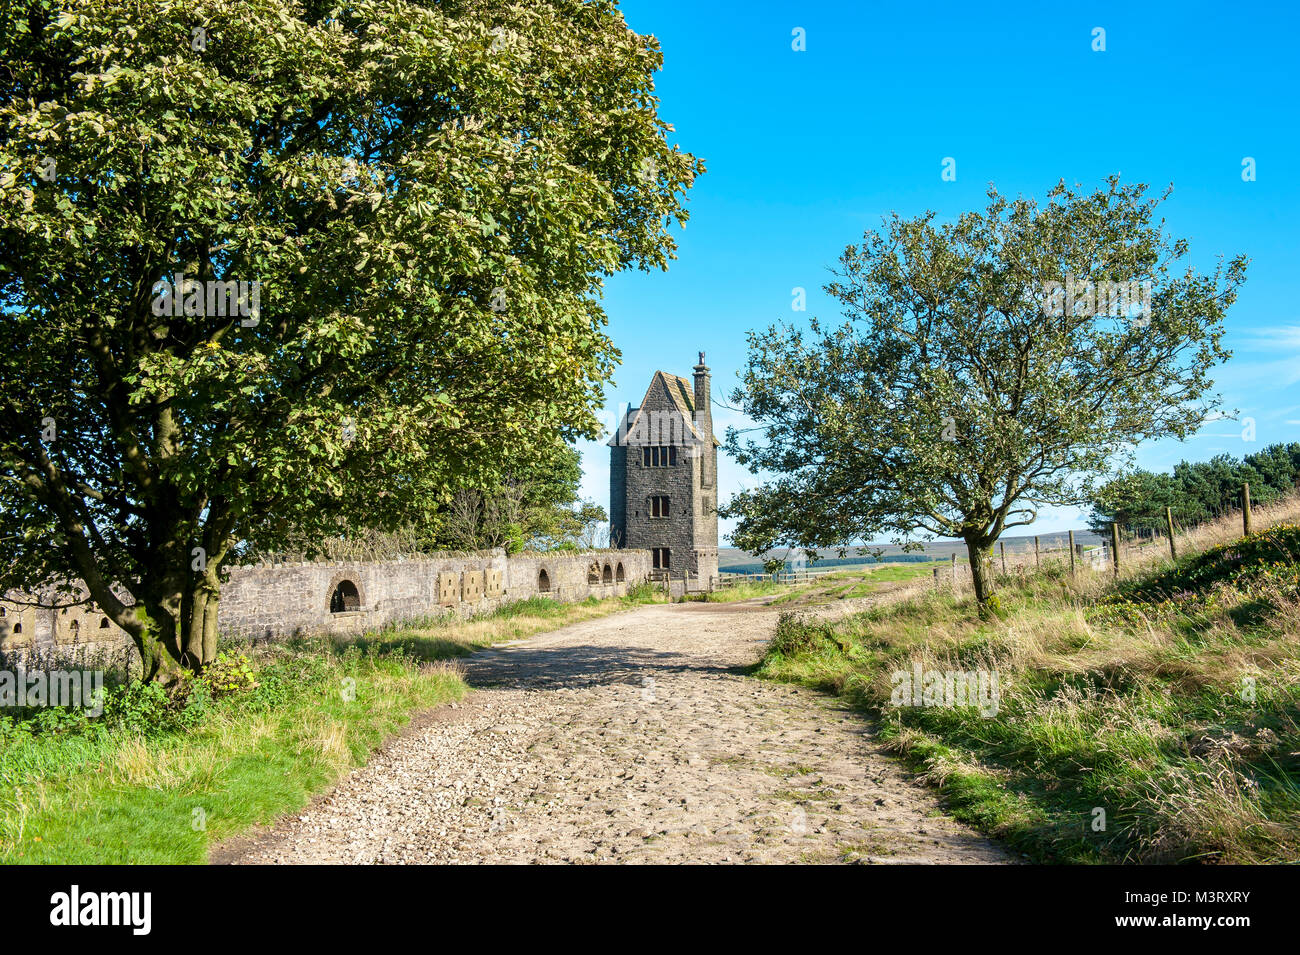 The Pigeon Tower Rivington It was built in 1910 by Lord Leverhulme as part of his Rivington estate in Lever Park and stands at the north west edge of  Stock Photo